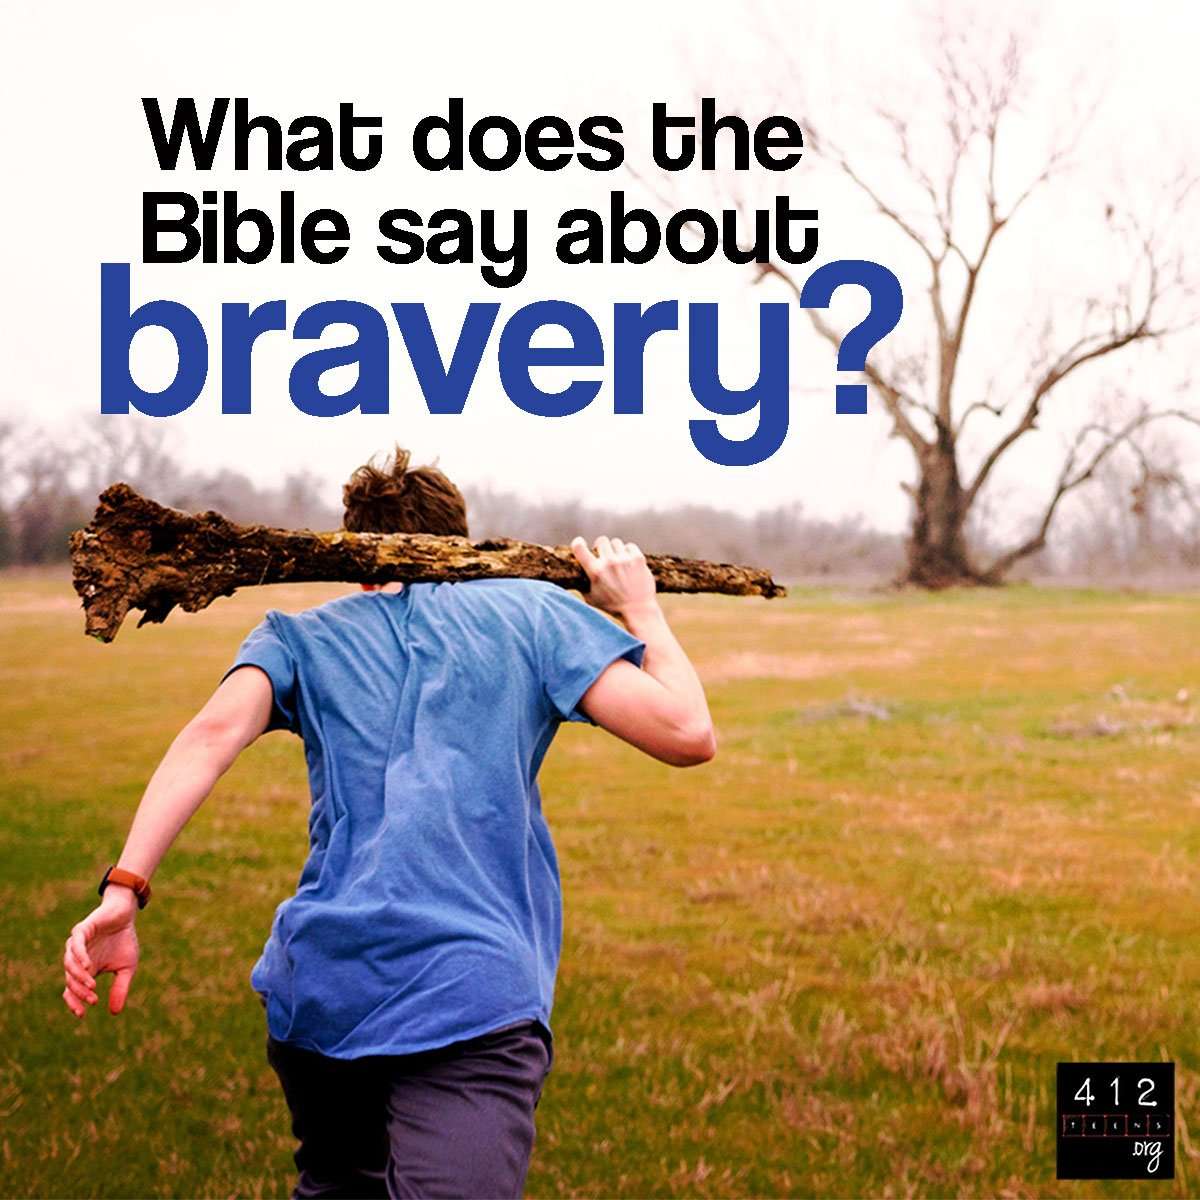 What does the Bible say about bravery?